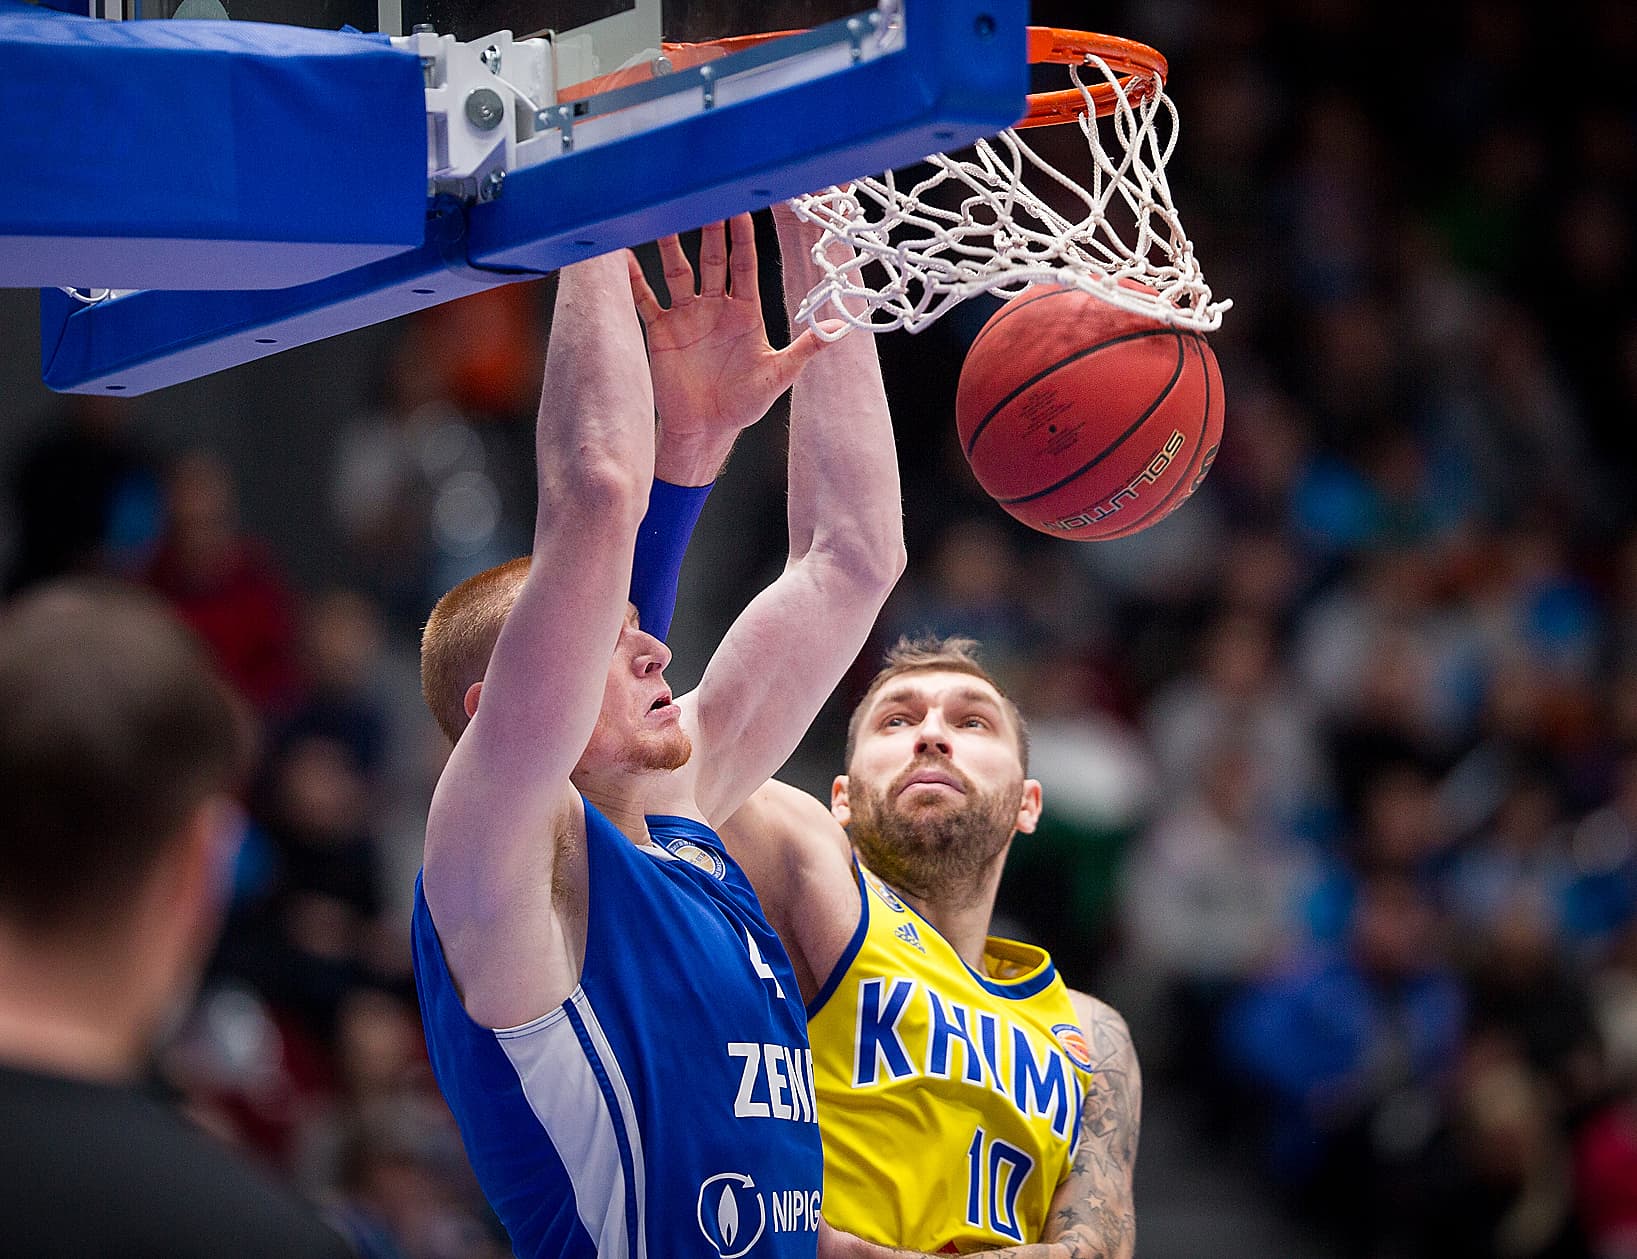 CSKA Leads VTB; Epic Game Between Zenit And Khimki